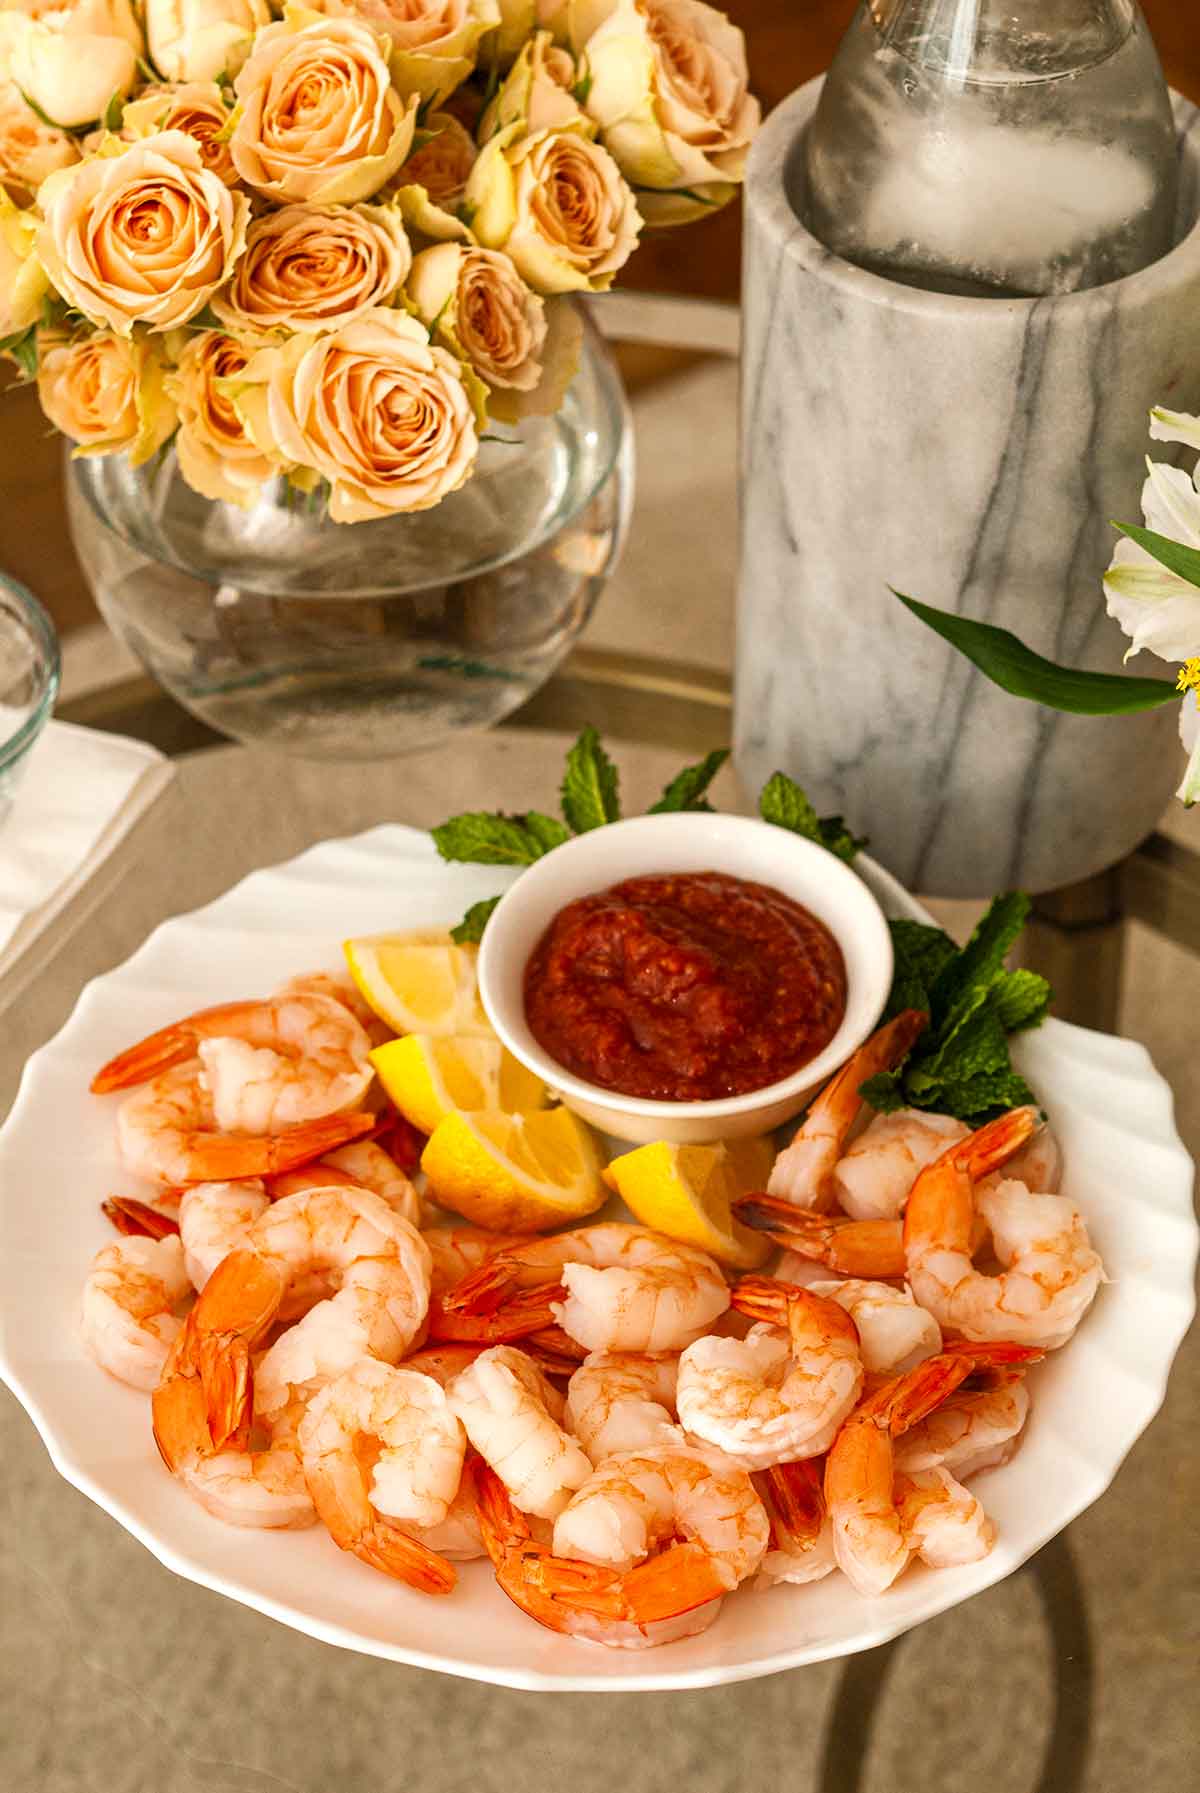 Shrimp cocktail on a shell-shaped plate beside roses and a bottle of water in a marble holder.